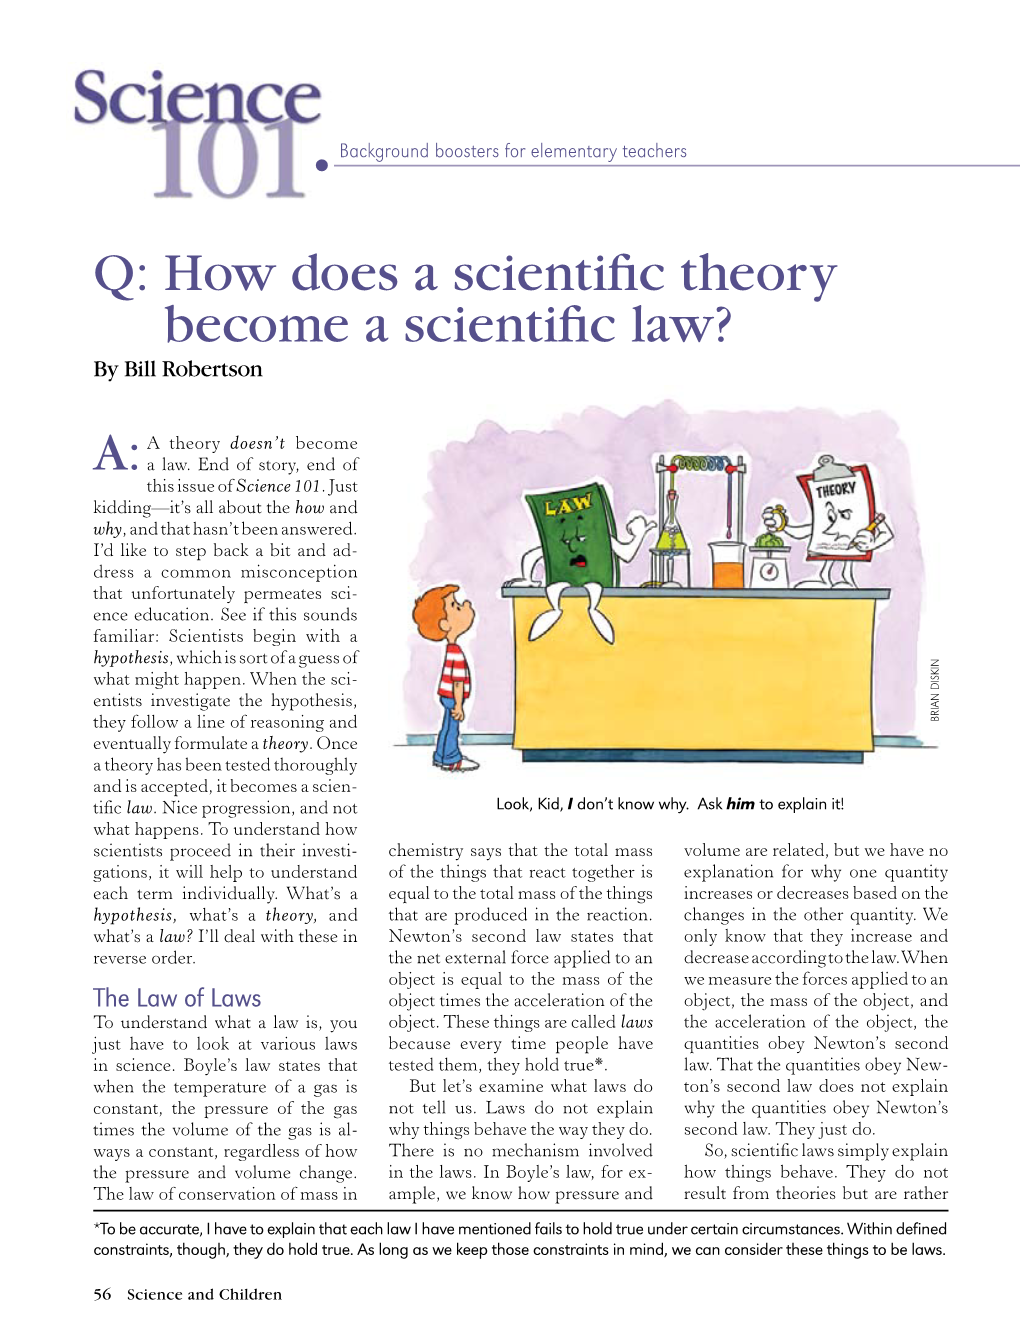 Q: How Does a Scientific Theory Become a Scientific Law? A